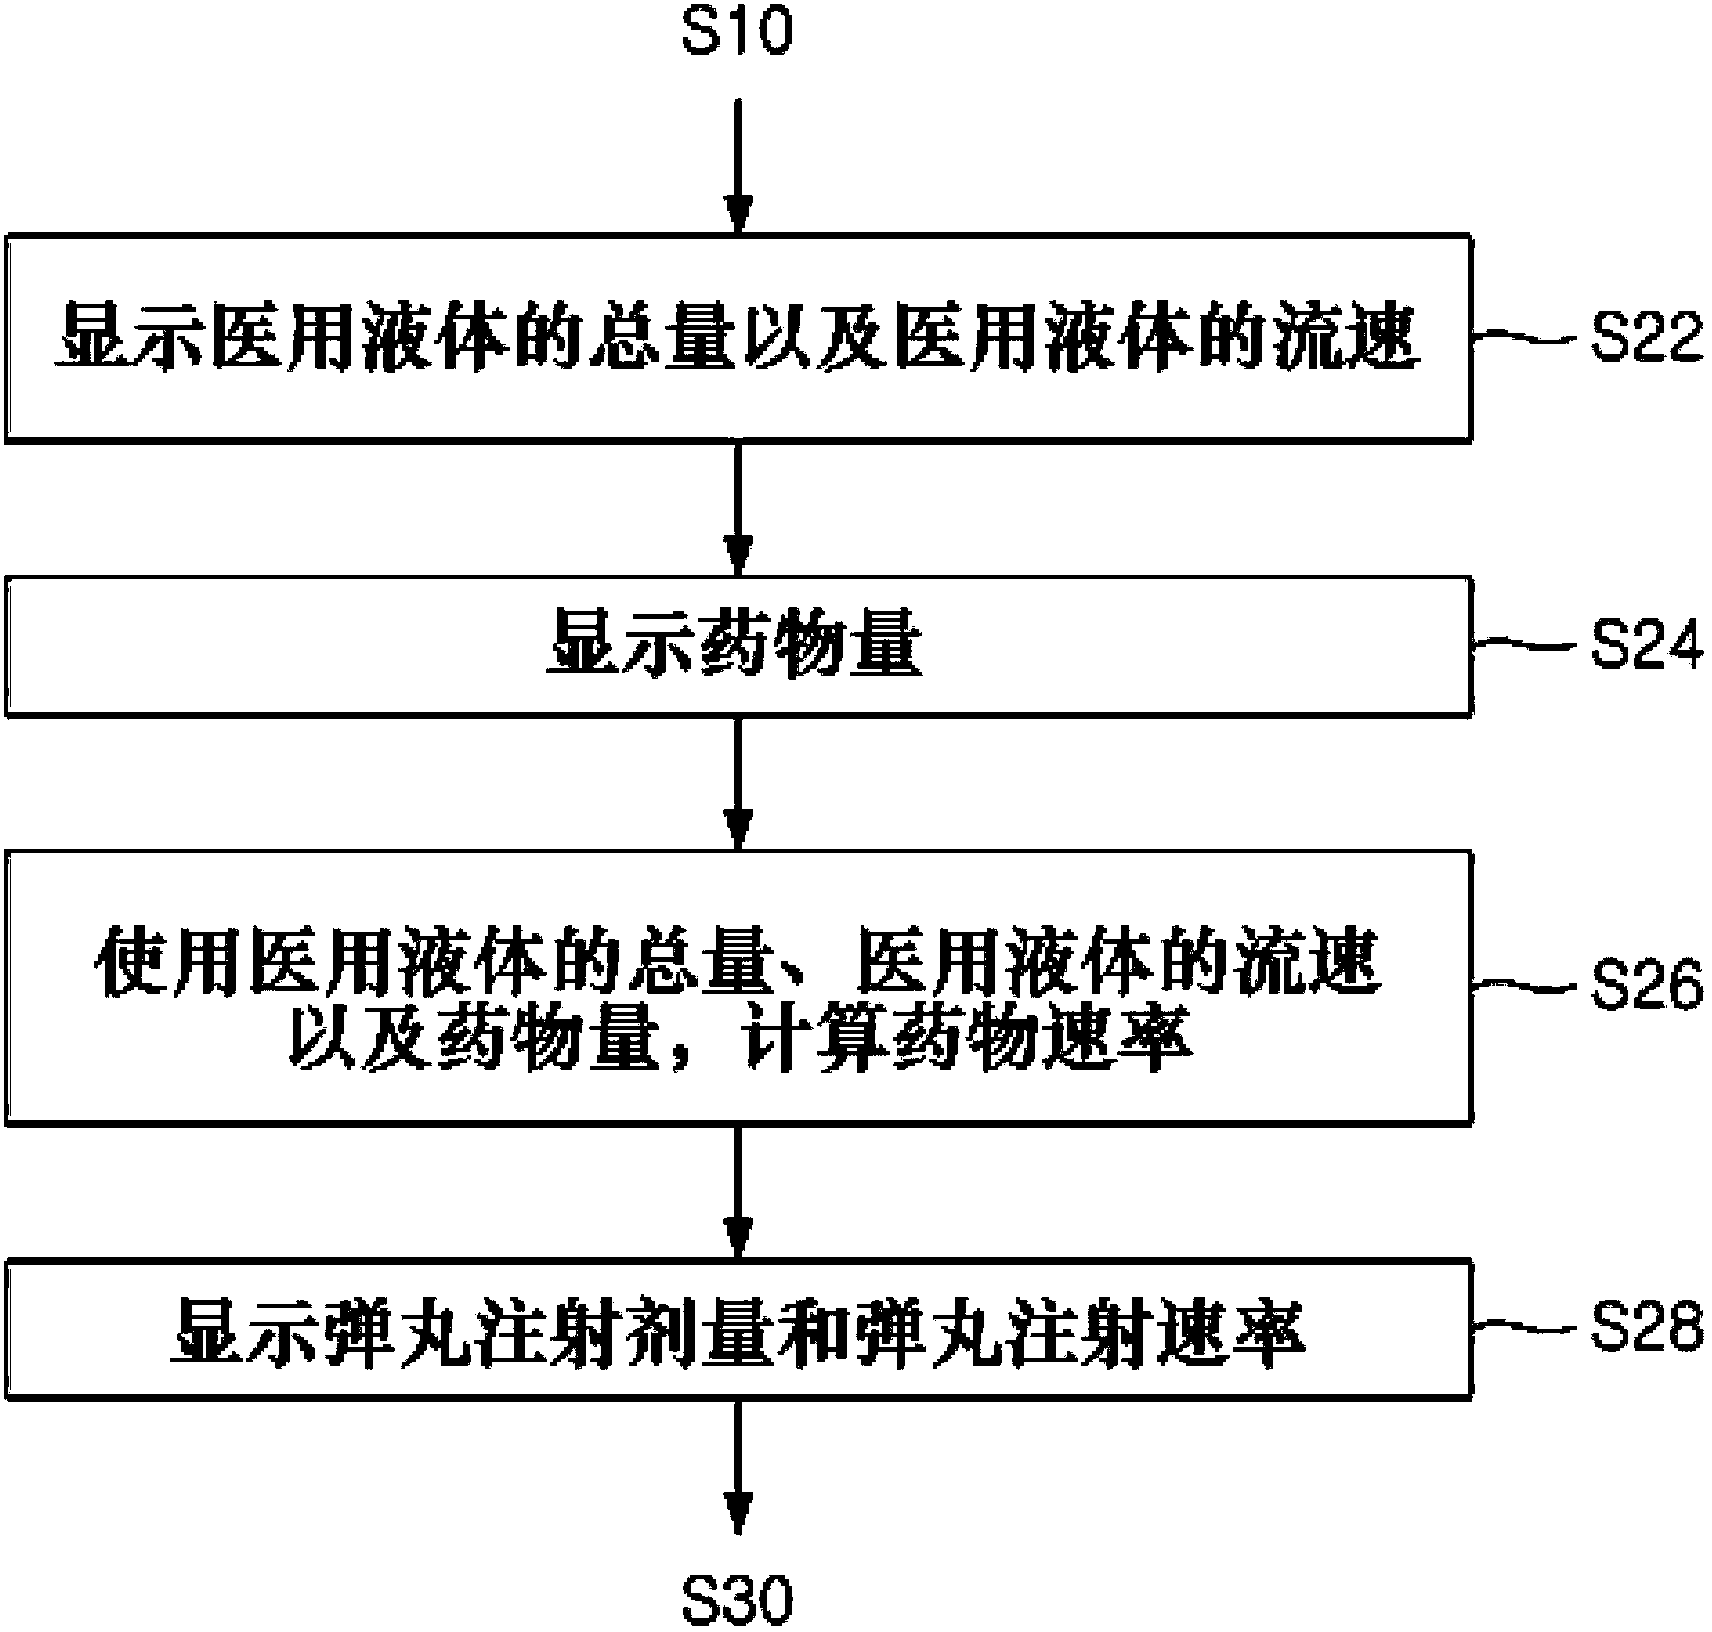 Method for managing history of liquid medicine injections